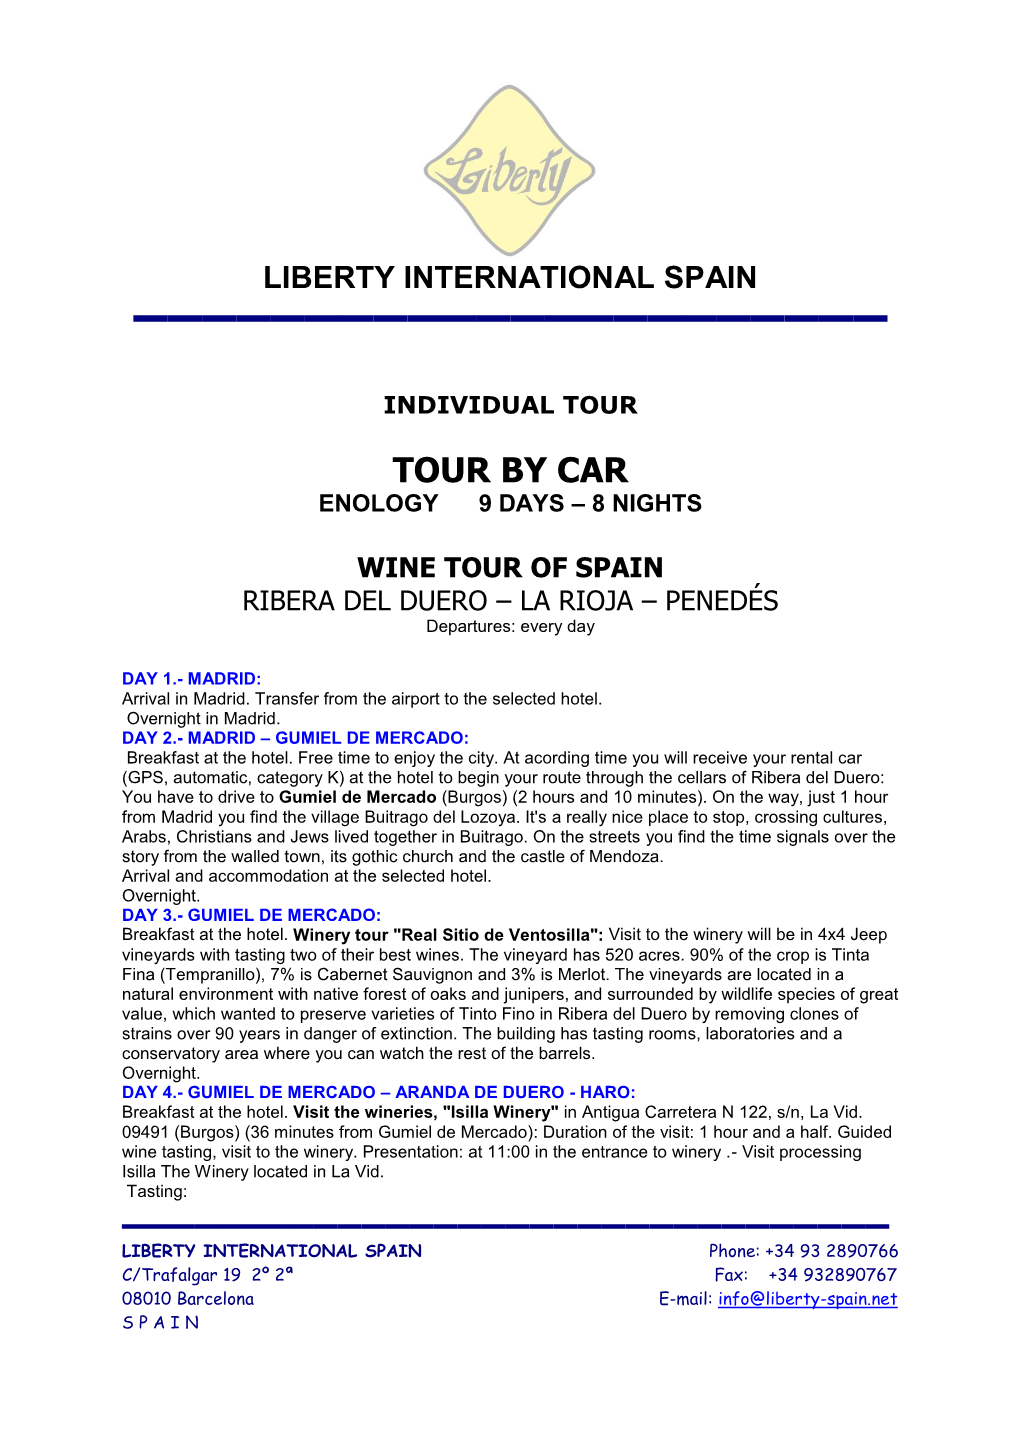 Tour by Car Enology 9 Days – 8 Nights